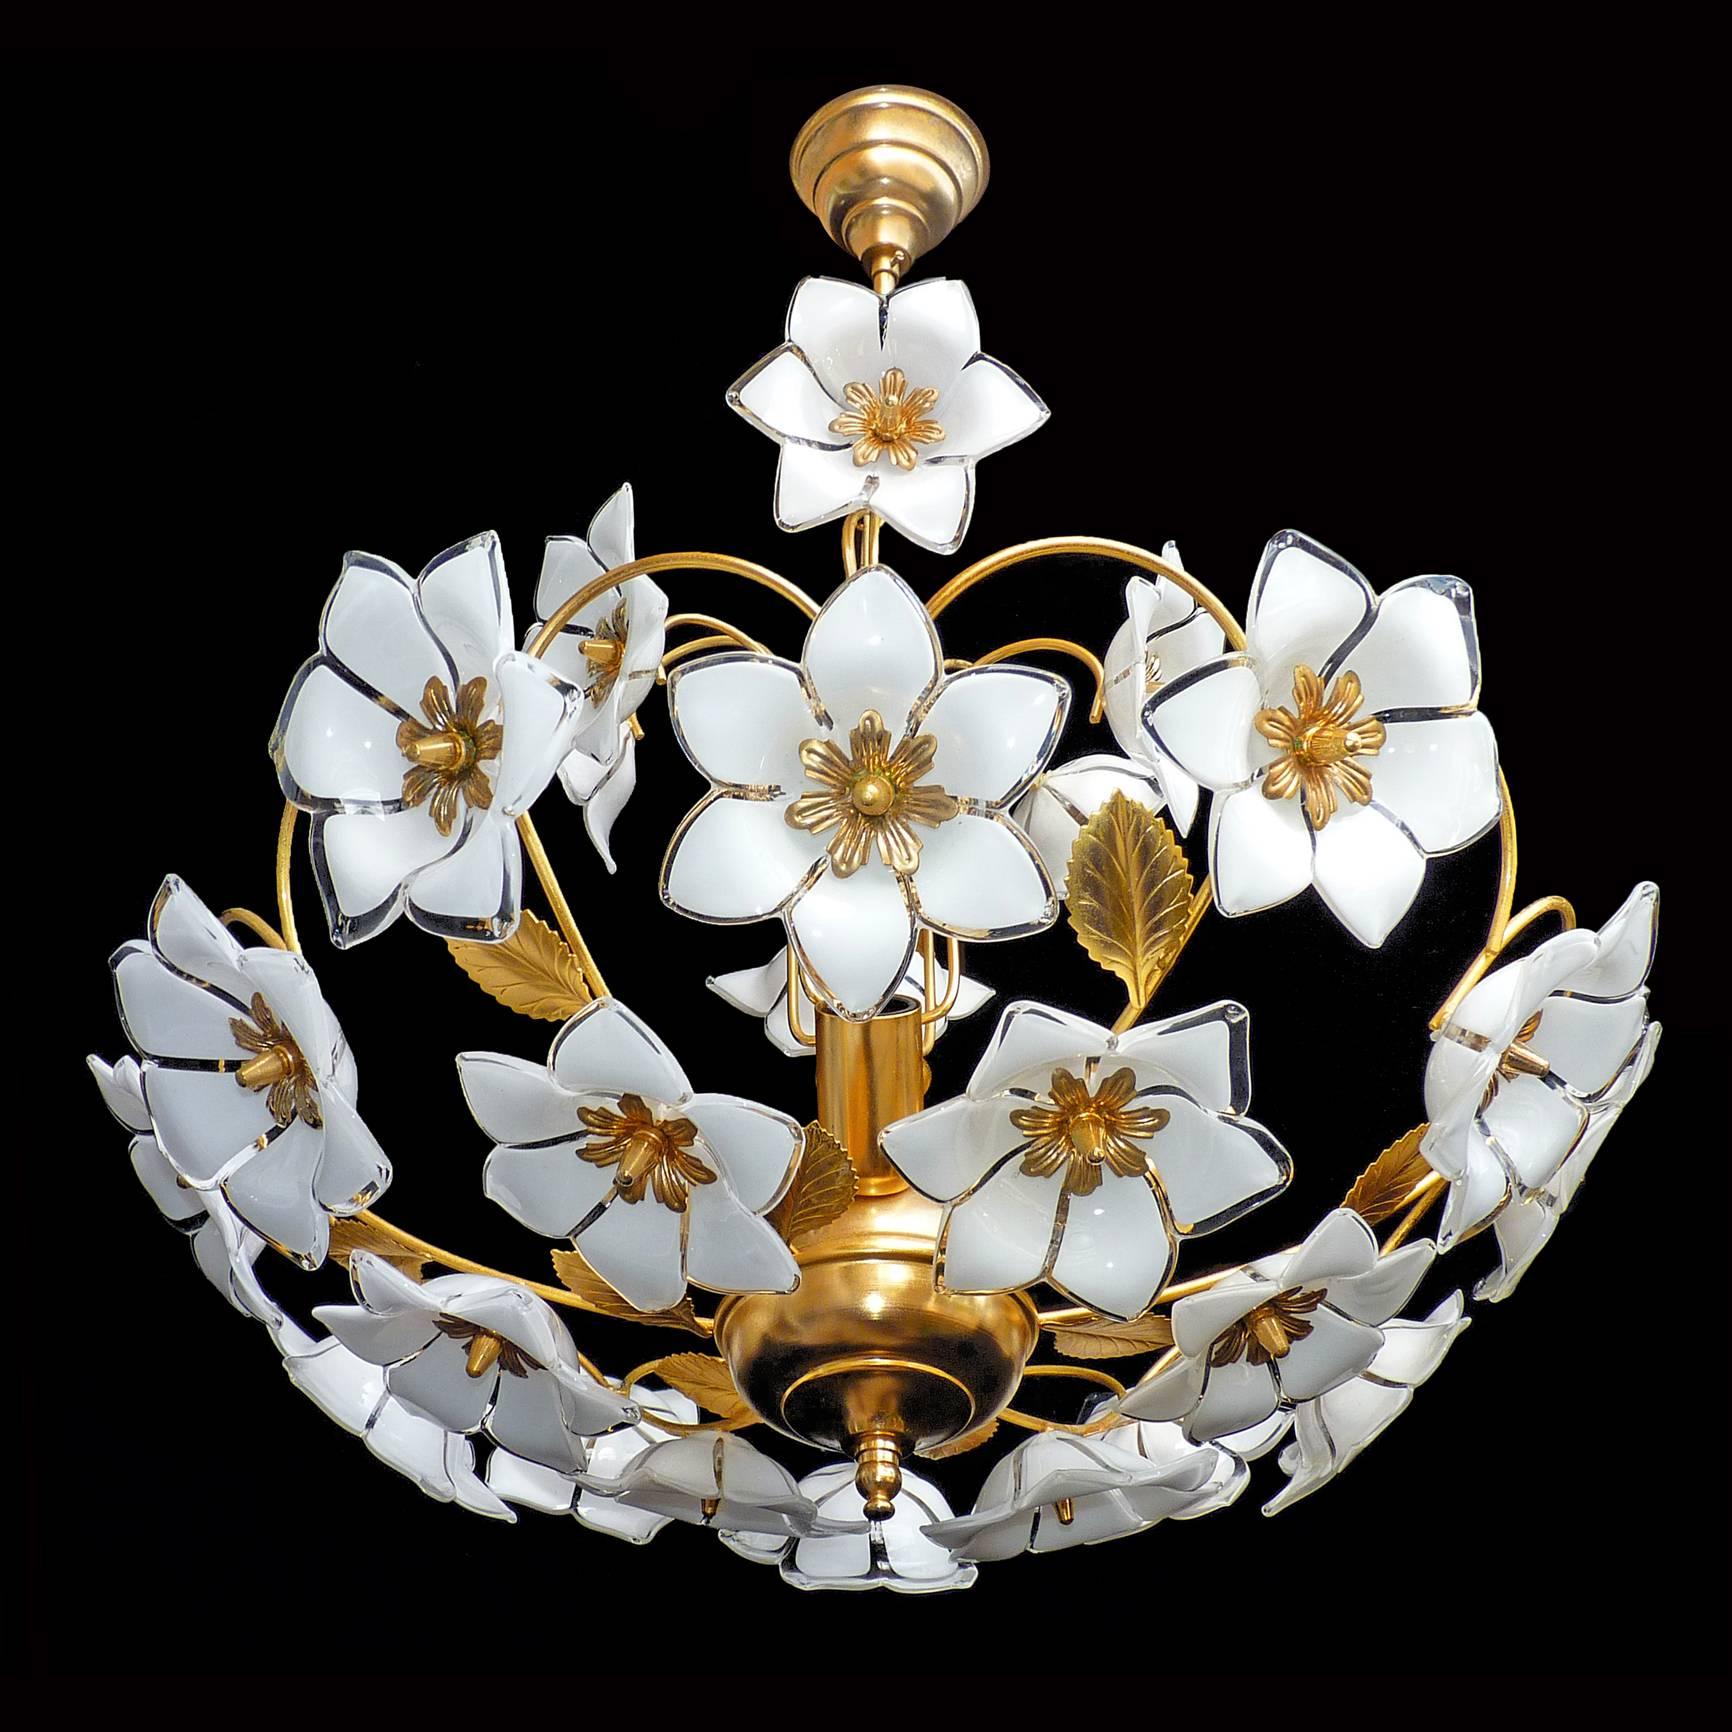 1960s vintage Italian Murano flower bouquet after Venini art-glass/ 24 hand-blow white and clear glass flowers and gold-plated brass.
Measures:
Diameter 22 in/ 55 cm
Height 30 in/ 75 cm
Weight: 11 lb/5 Kg
Four light bulbs E14/ 60 W - Good